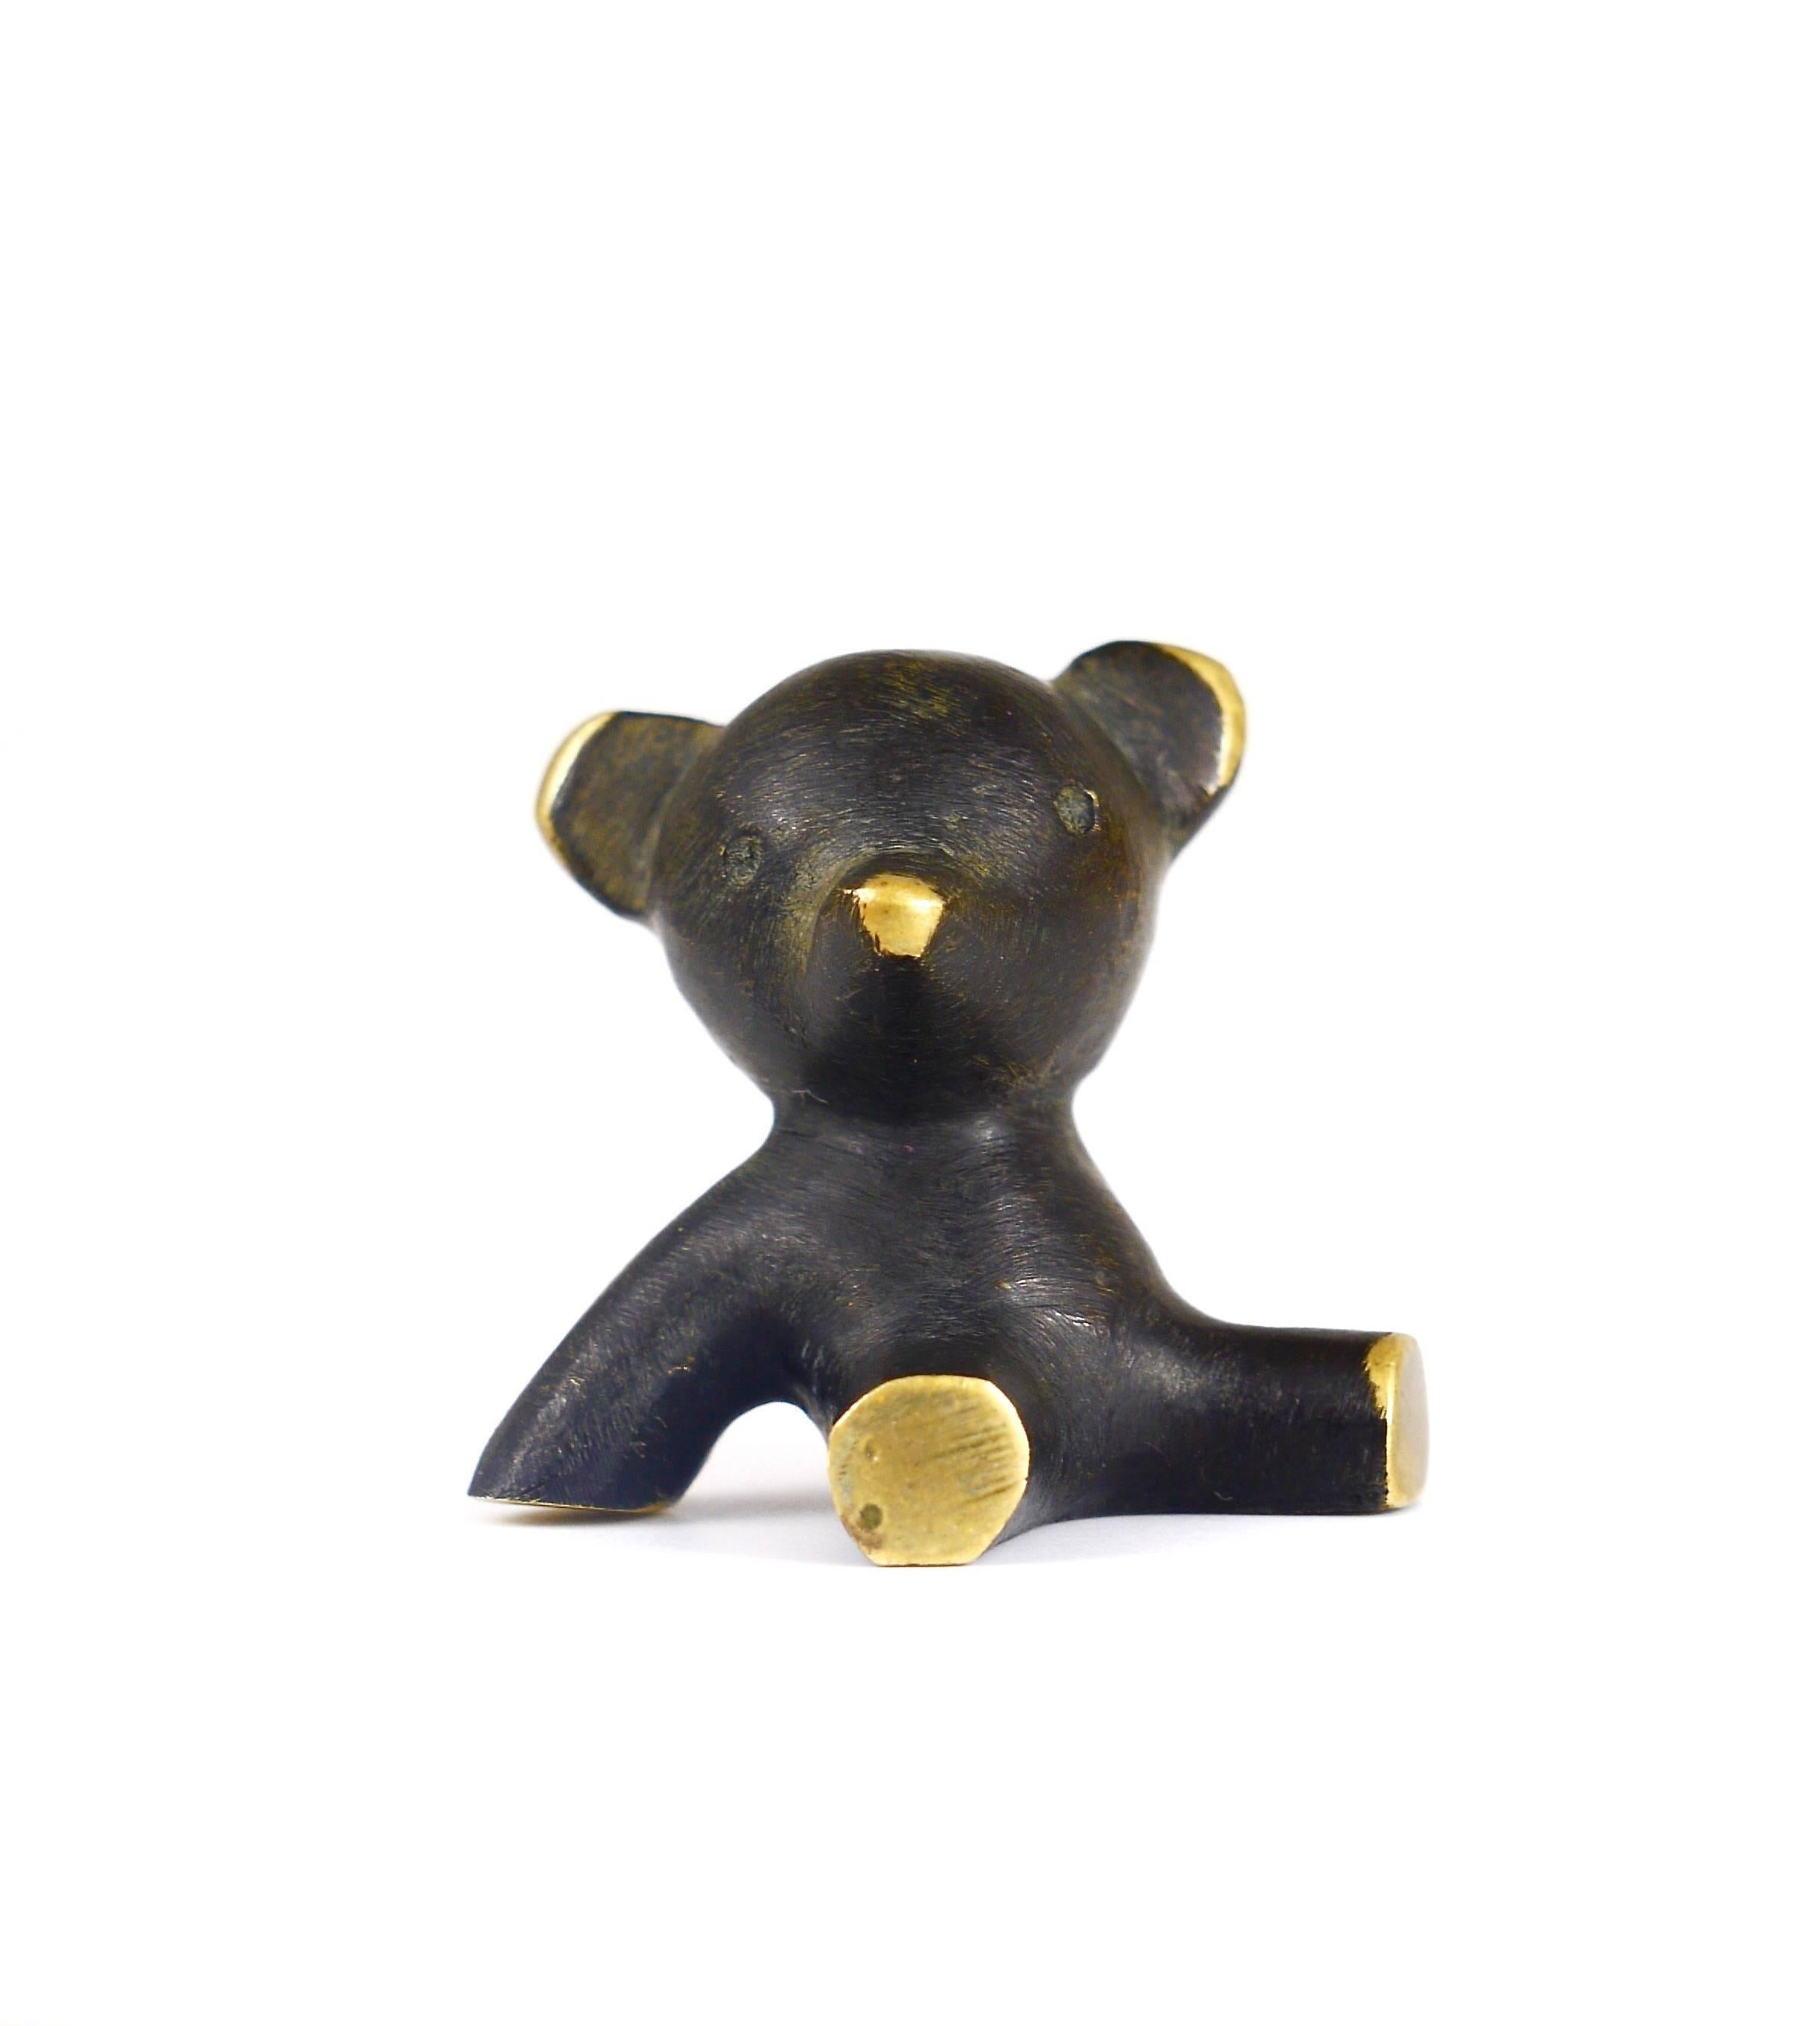 A charming brass sculpture from the 1950s, displaying a sitting bear. A humorous design by Walter Bosse, executed by Hertha Baller Austria in the 1950s. In excellent condition. Marked. We offer more Walter Bosse brass object in our other listings.